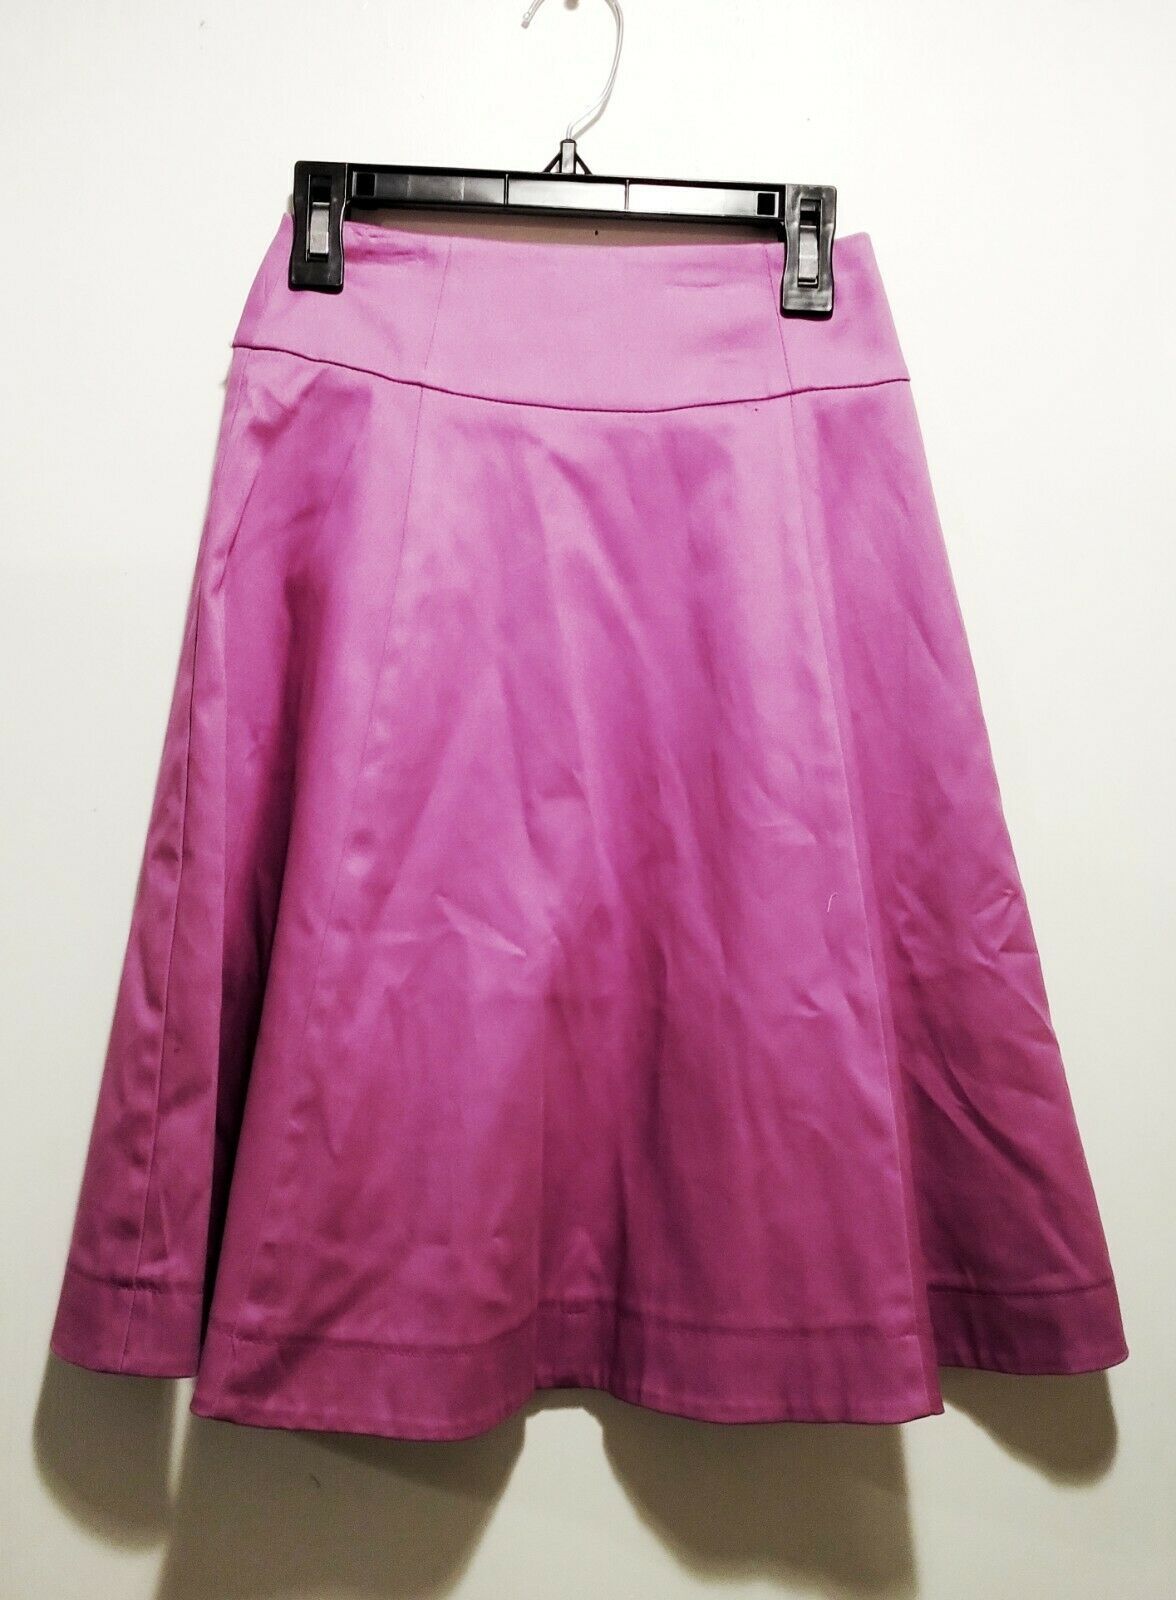 NWT Skirt Mi Collection Brand Midi Paneled A-Line Pink Color Sizes 10, 12, 16